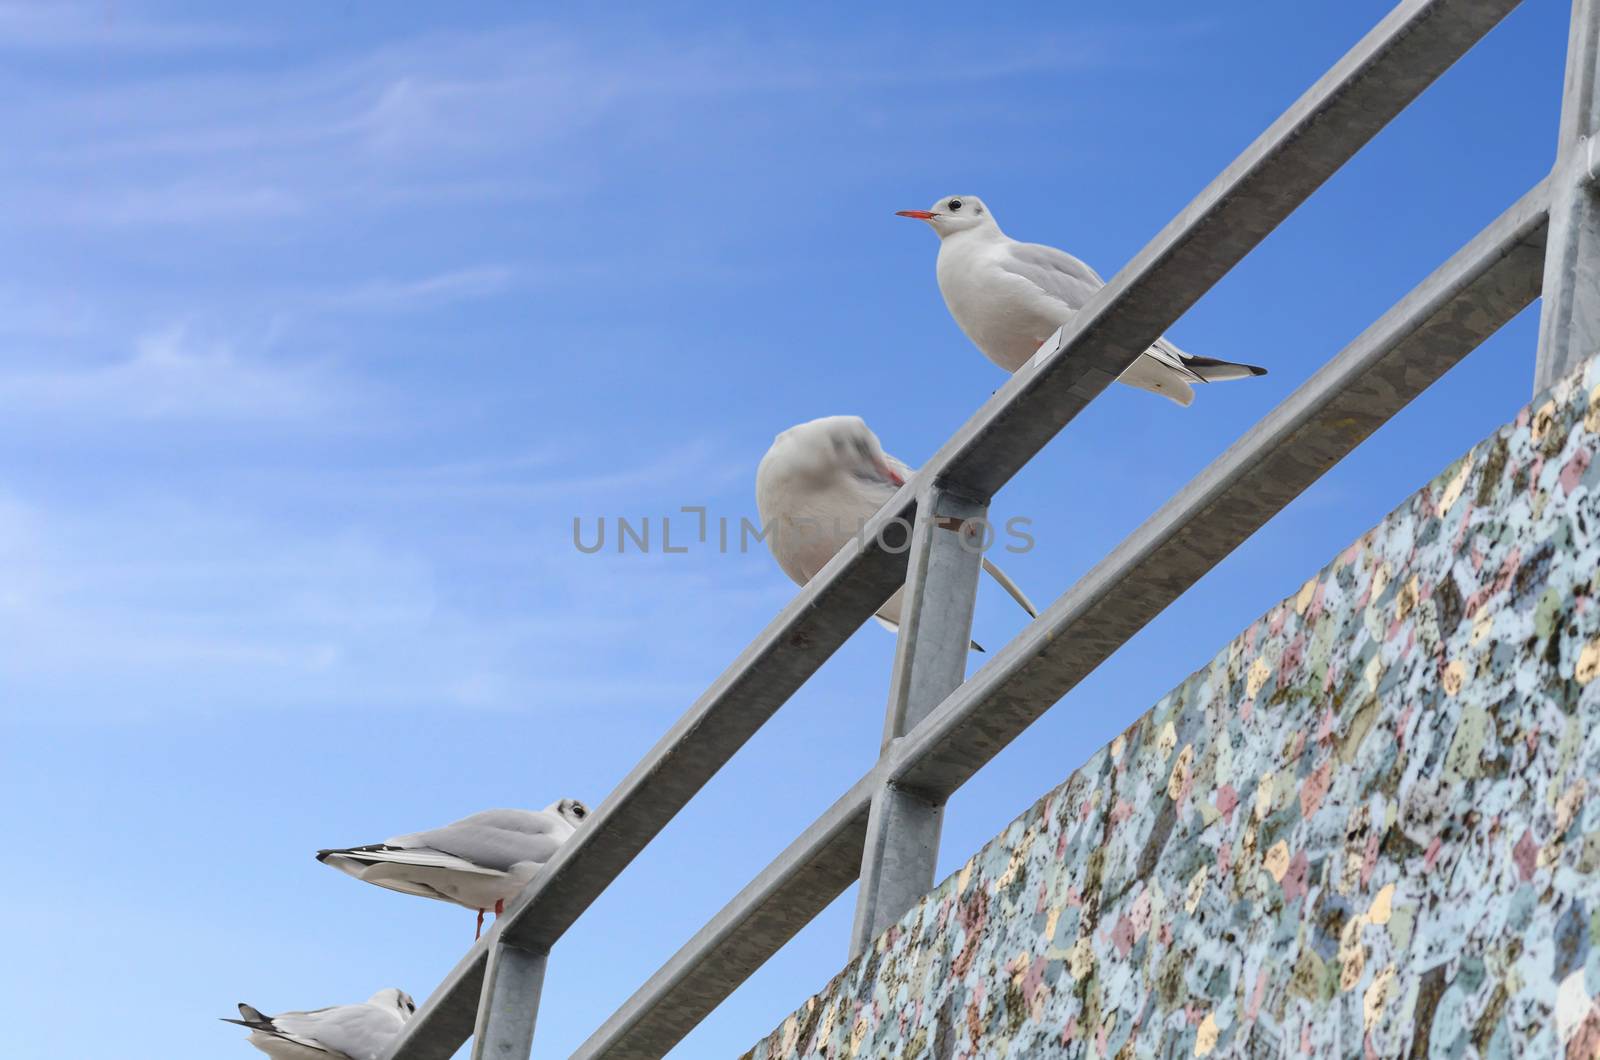 Seagulls against blue sky by JFsPic